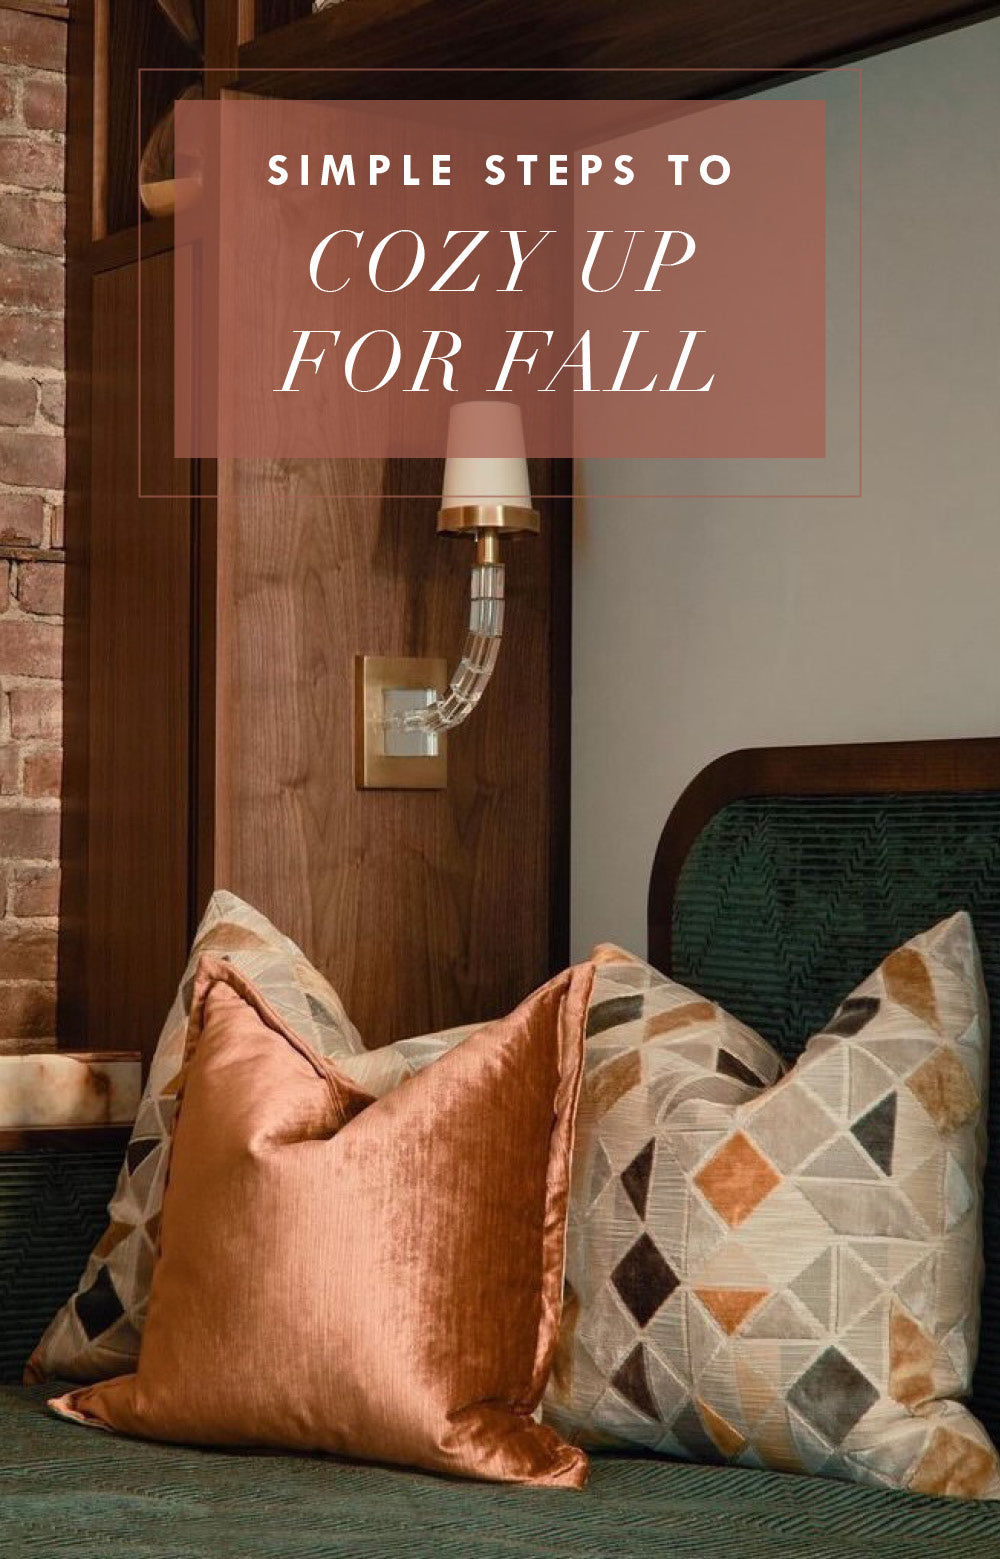 How to Cozy Up Your Home for Fall